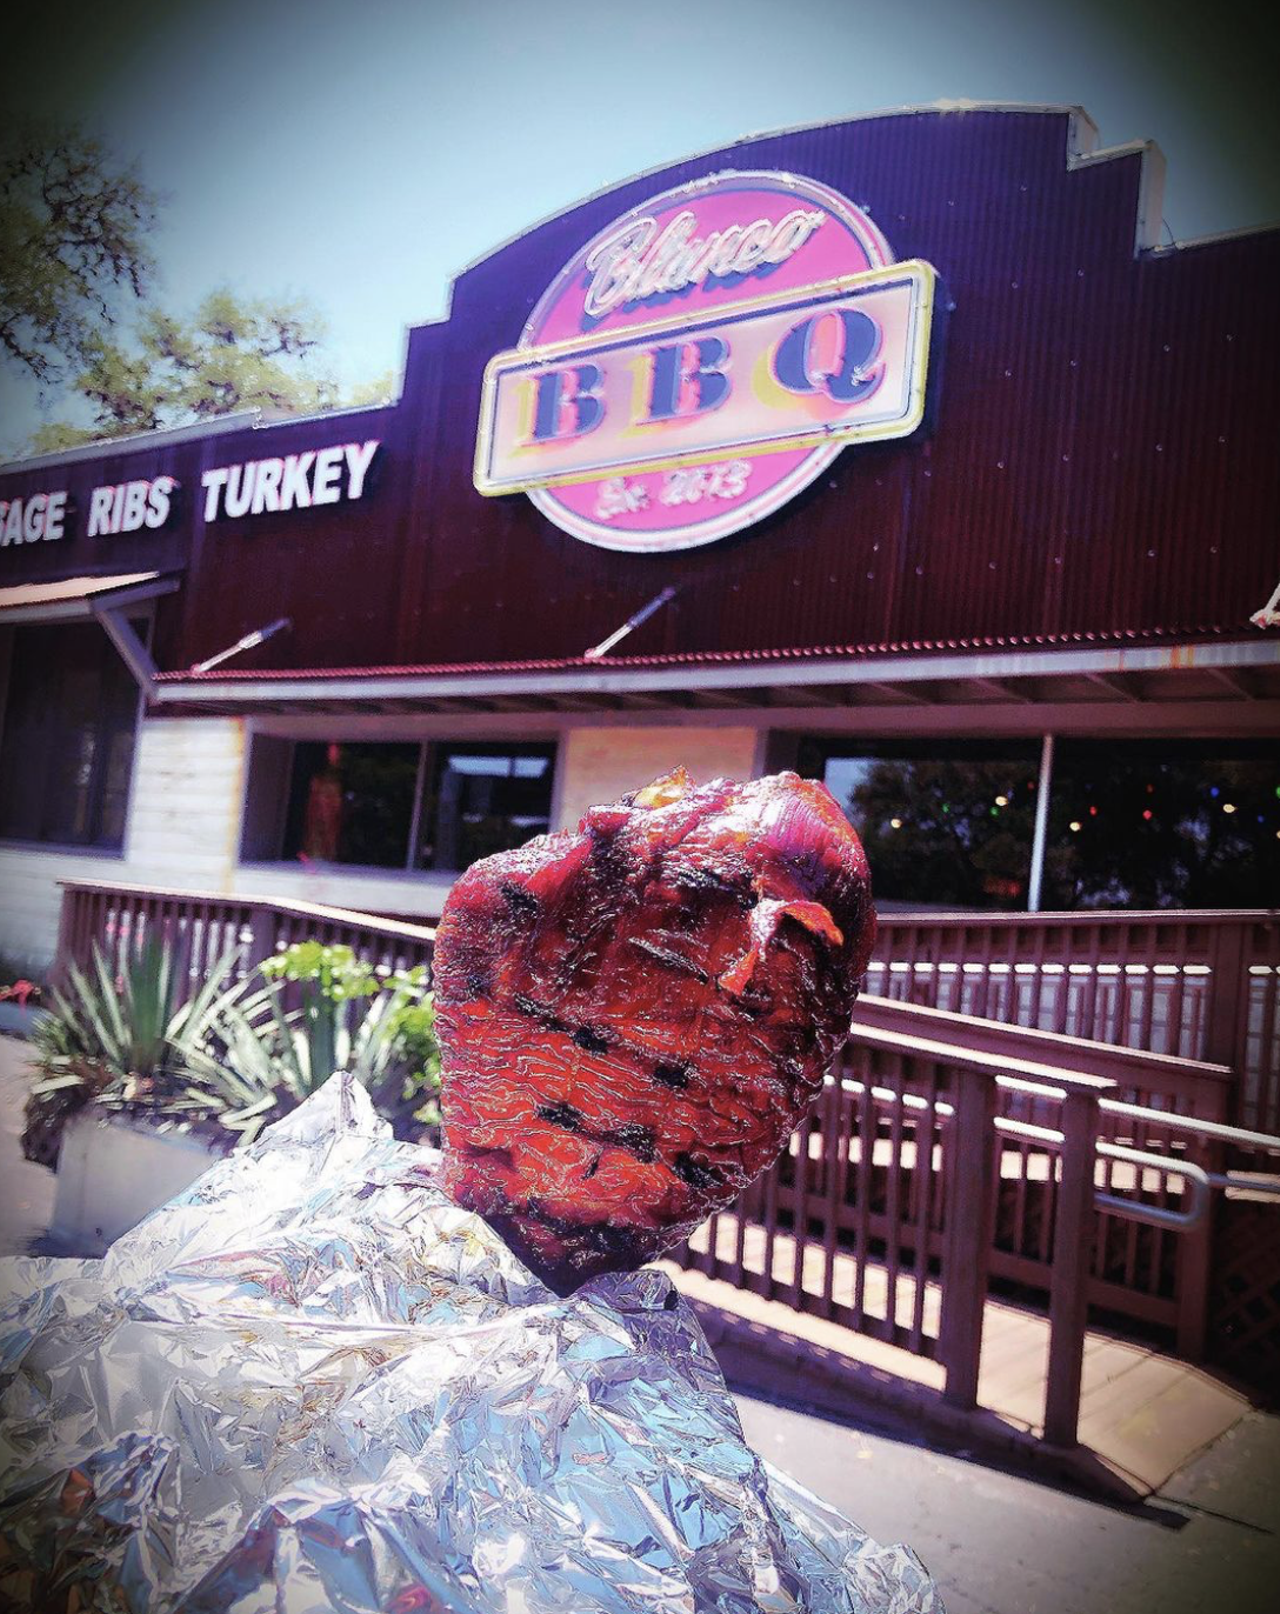 Blanco BBQ
13259 Blanco Road, (210) 251-2602, blancobbq.com
This BBQ joint has a Thanksgiving package large enough to feed an army — $200 gets you an 18-20 pound turkey and all the fixins in ready-to-heat containers for easy prep. 
Photo via Instagram / blancobbq_est2013